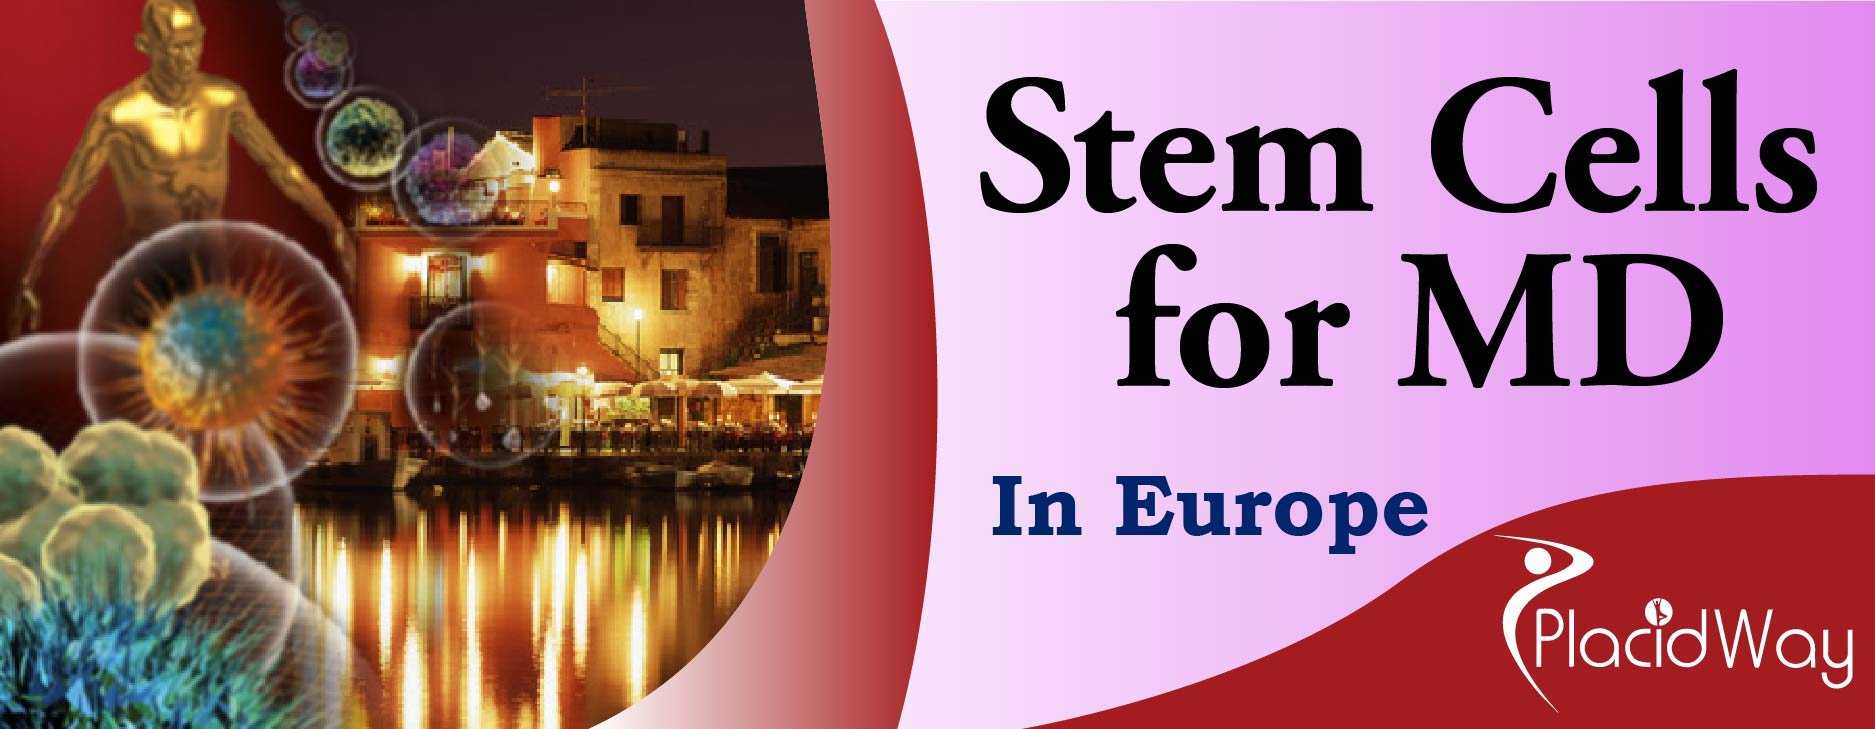 Best Muscular Dystrophy Treatments in Europe, Stem Cell Muscle Therapy